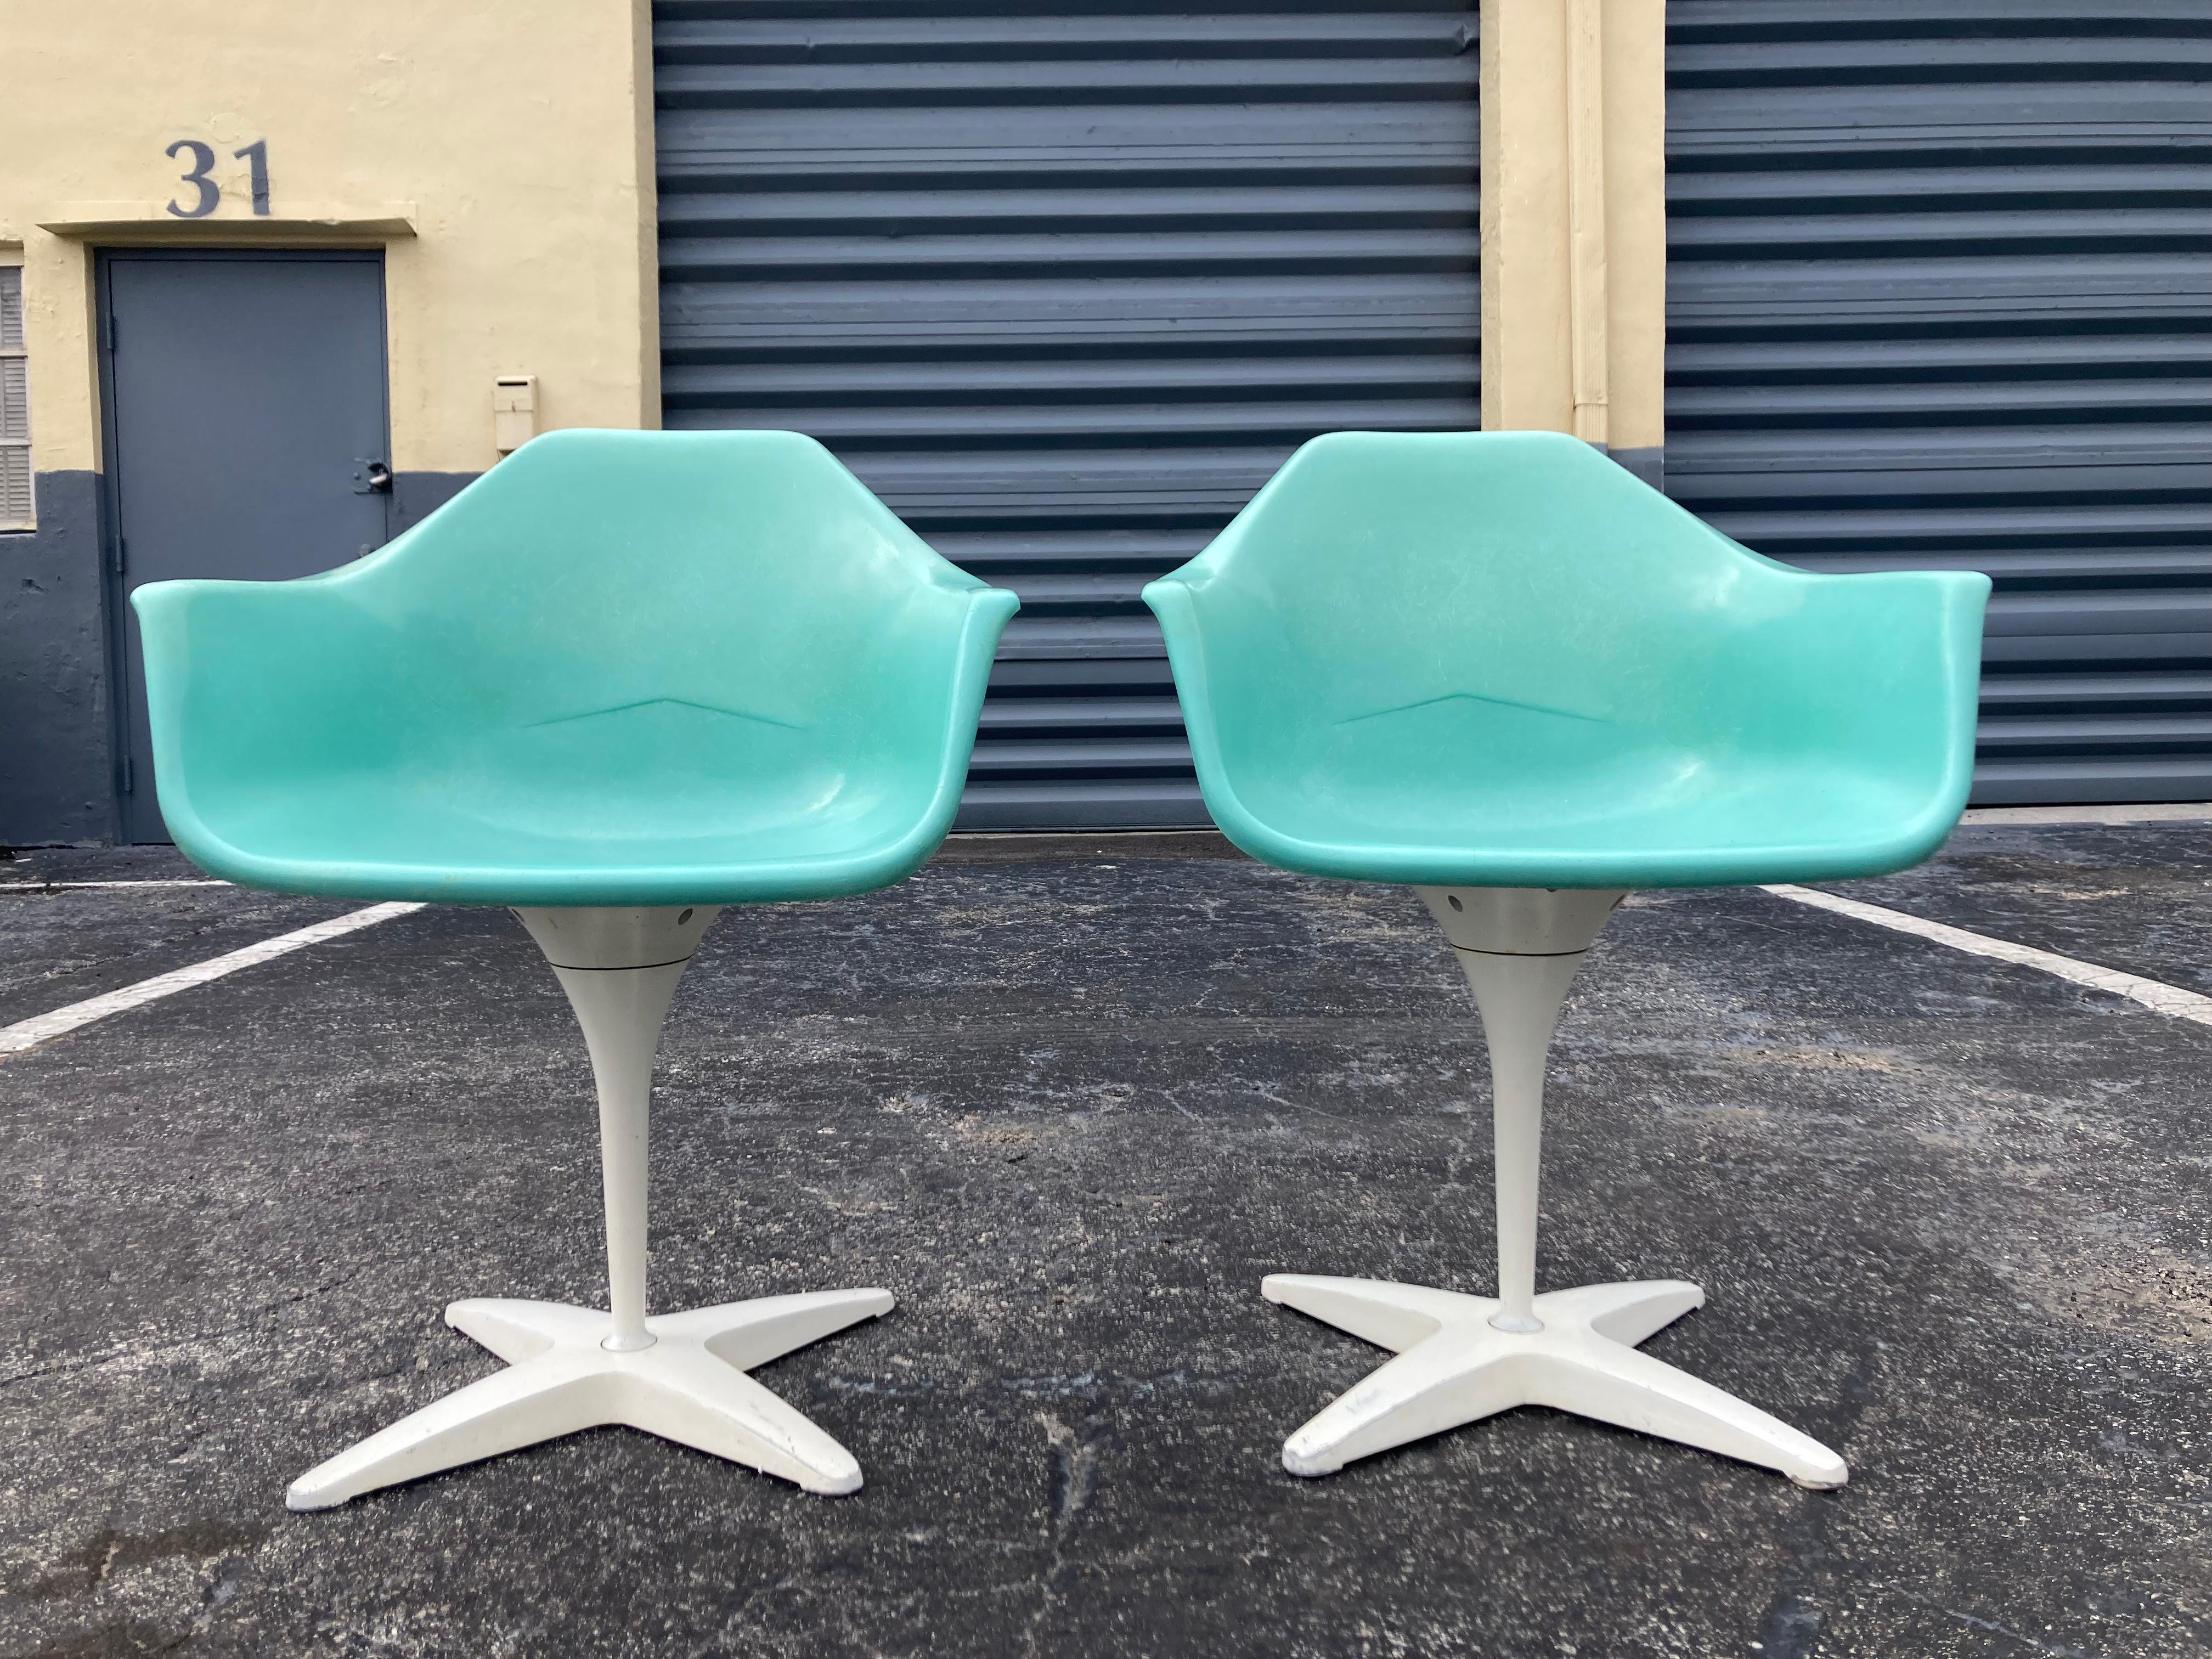 1960s Kitchen Dinette Set, Fiberglass Chairs, Turquoise, Round Table, USA For Sale 8